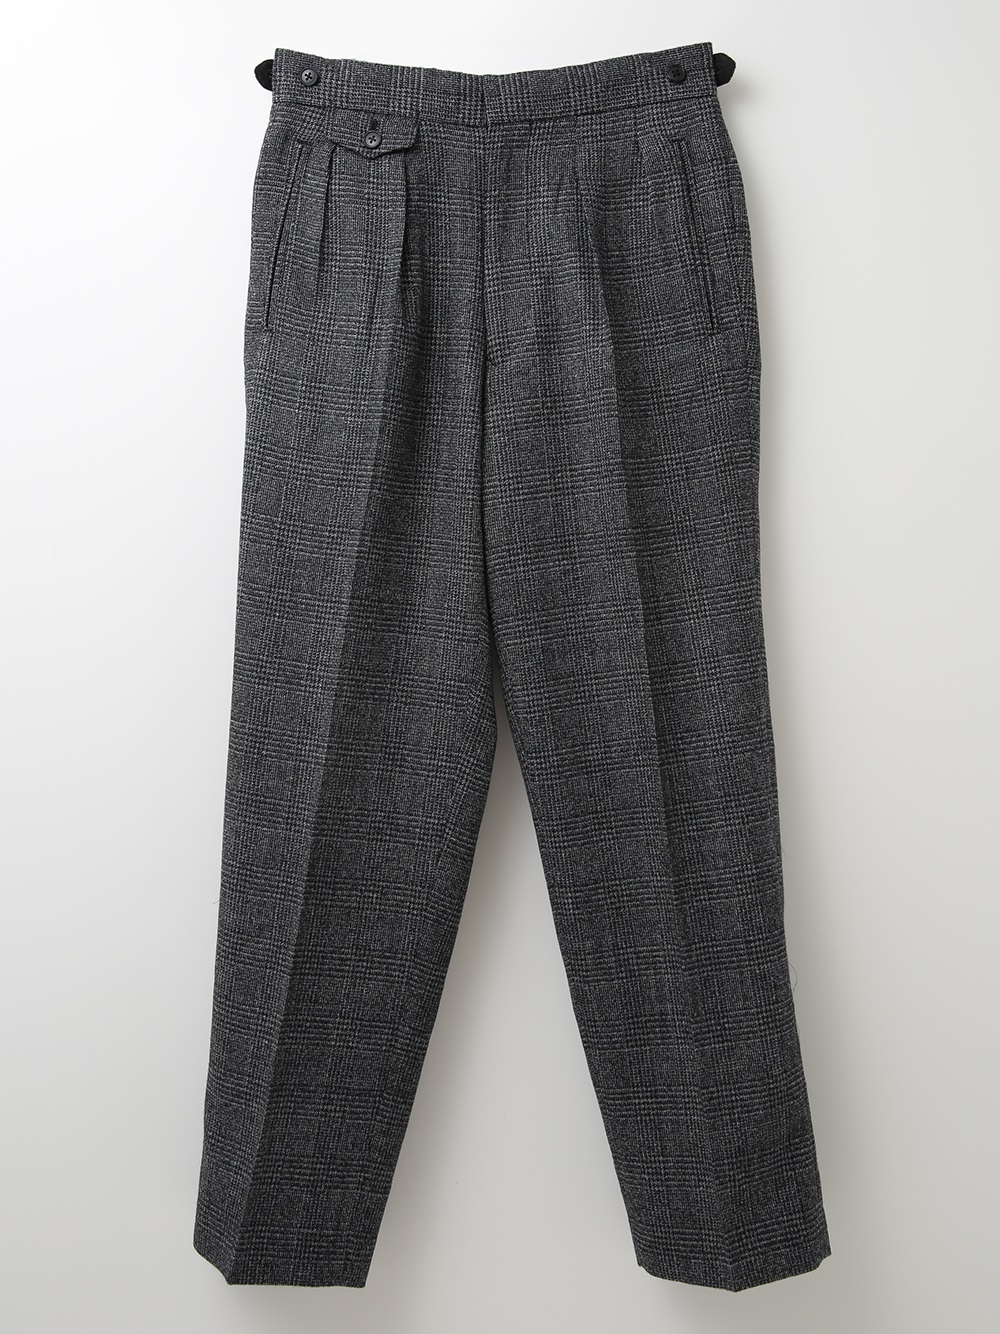 Wool Tailored Pants(03モノトーン-１)